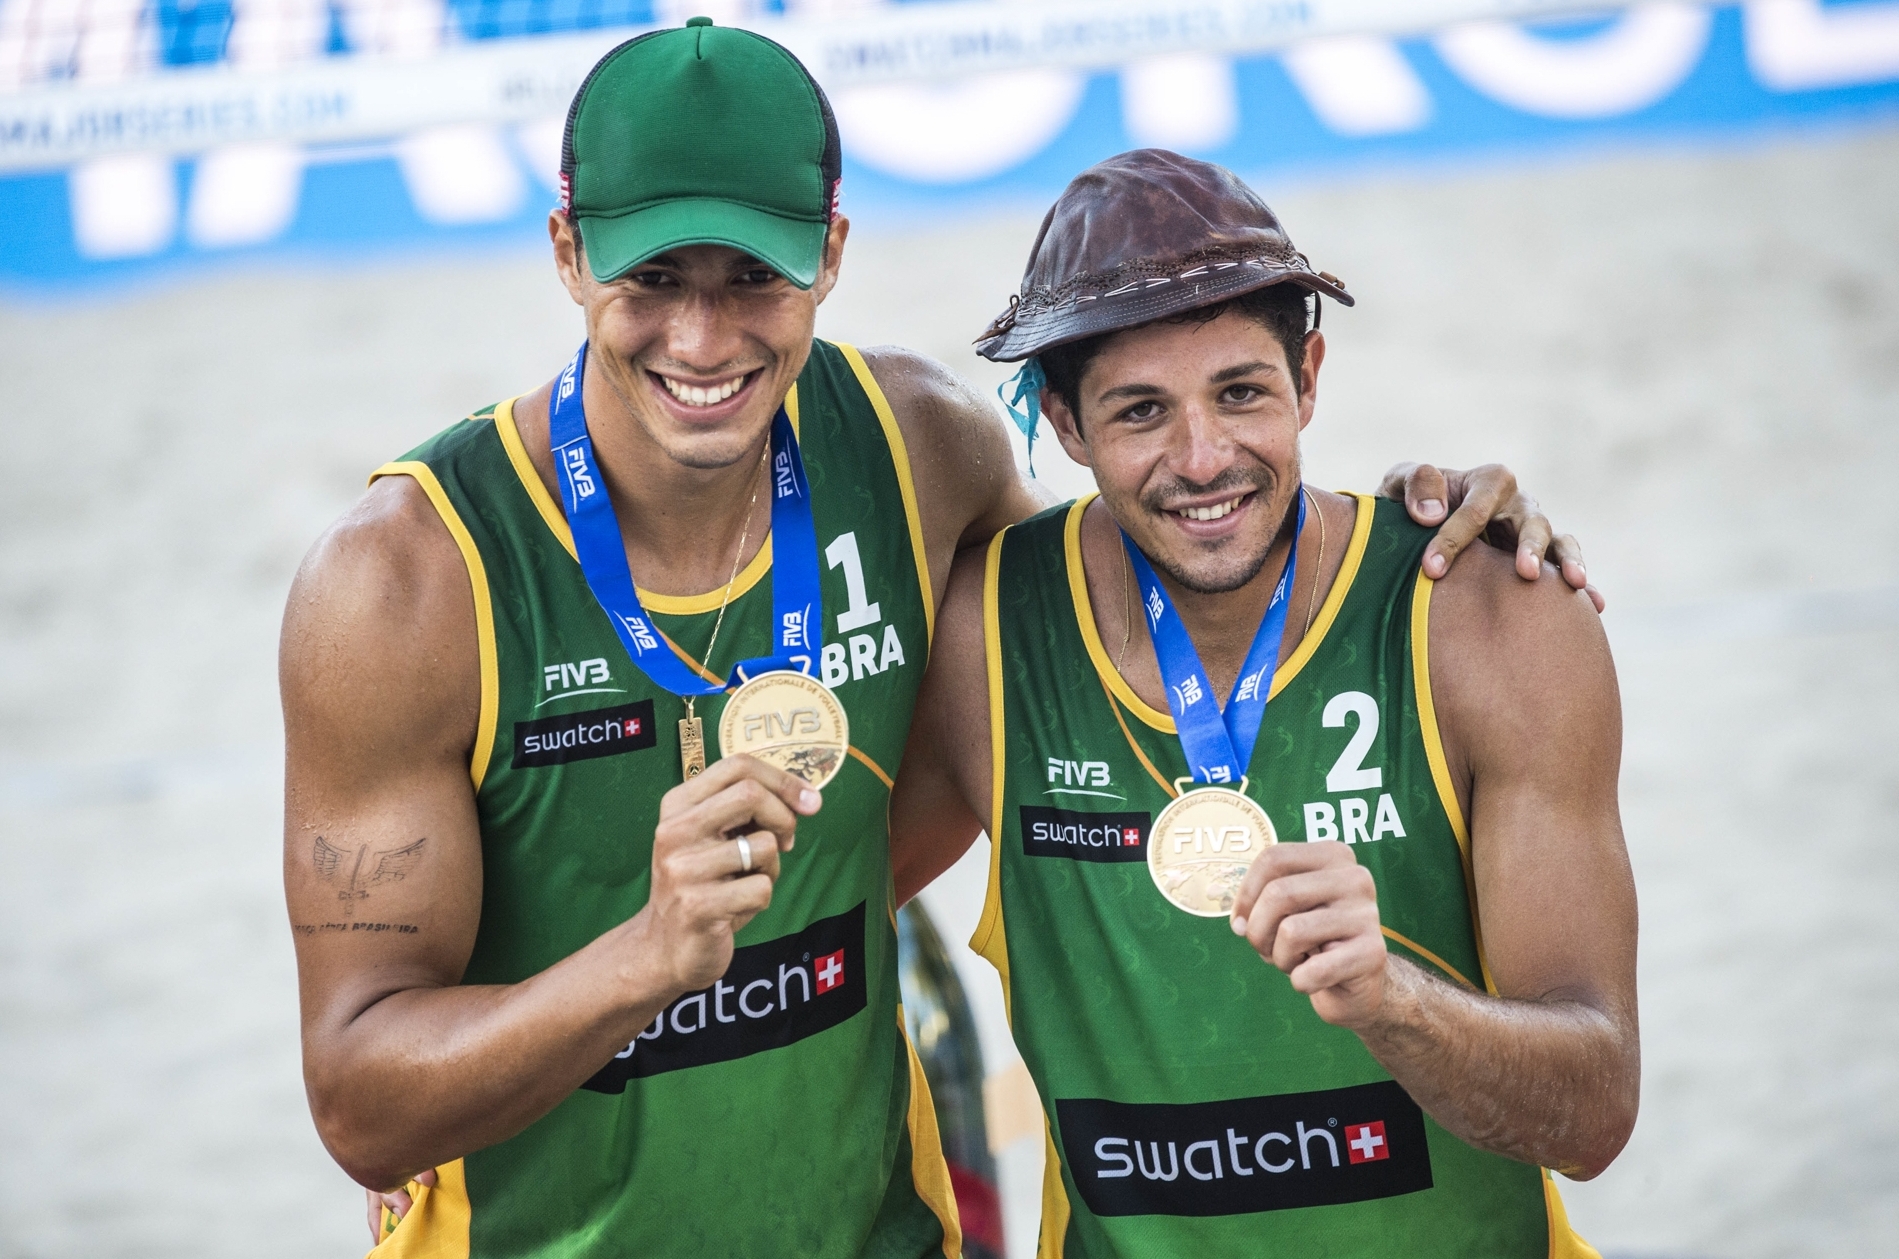 Saymon (left) and Alvaro clinched gold in their first international tournament together.